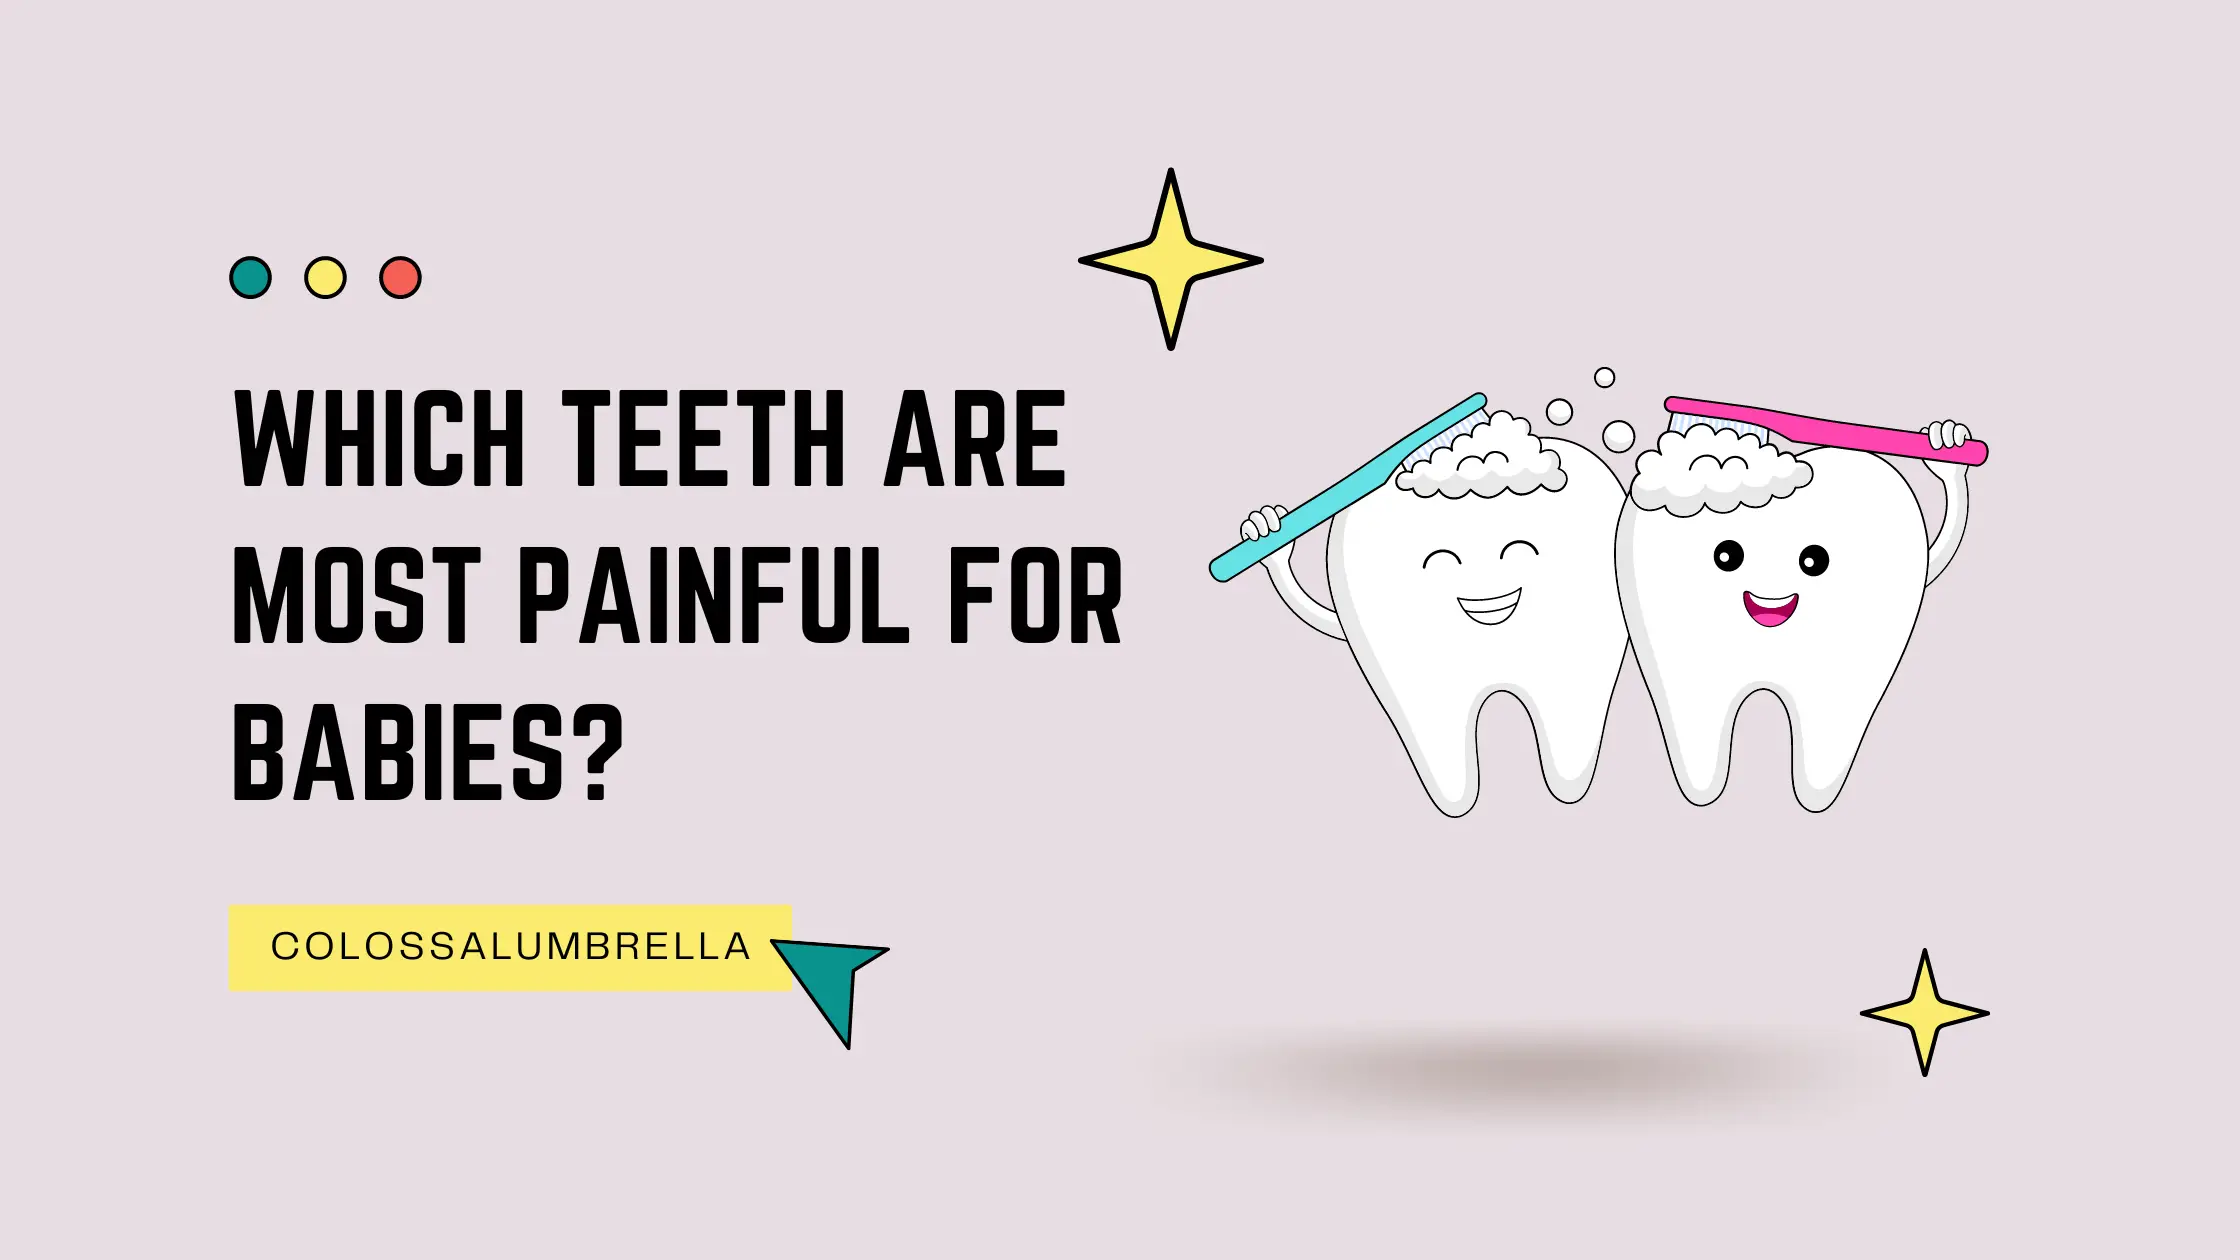 Which teeth are most painful for babies